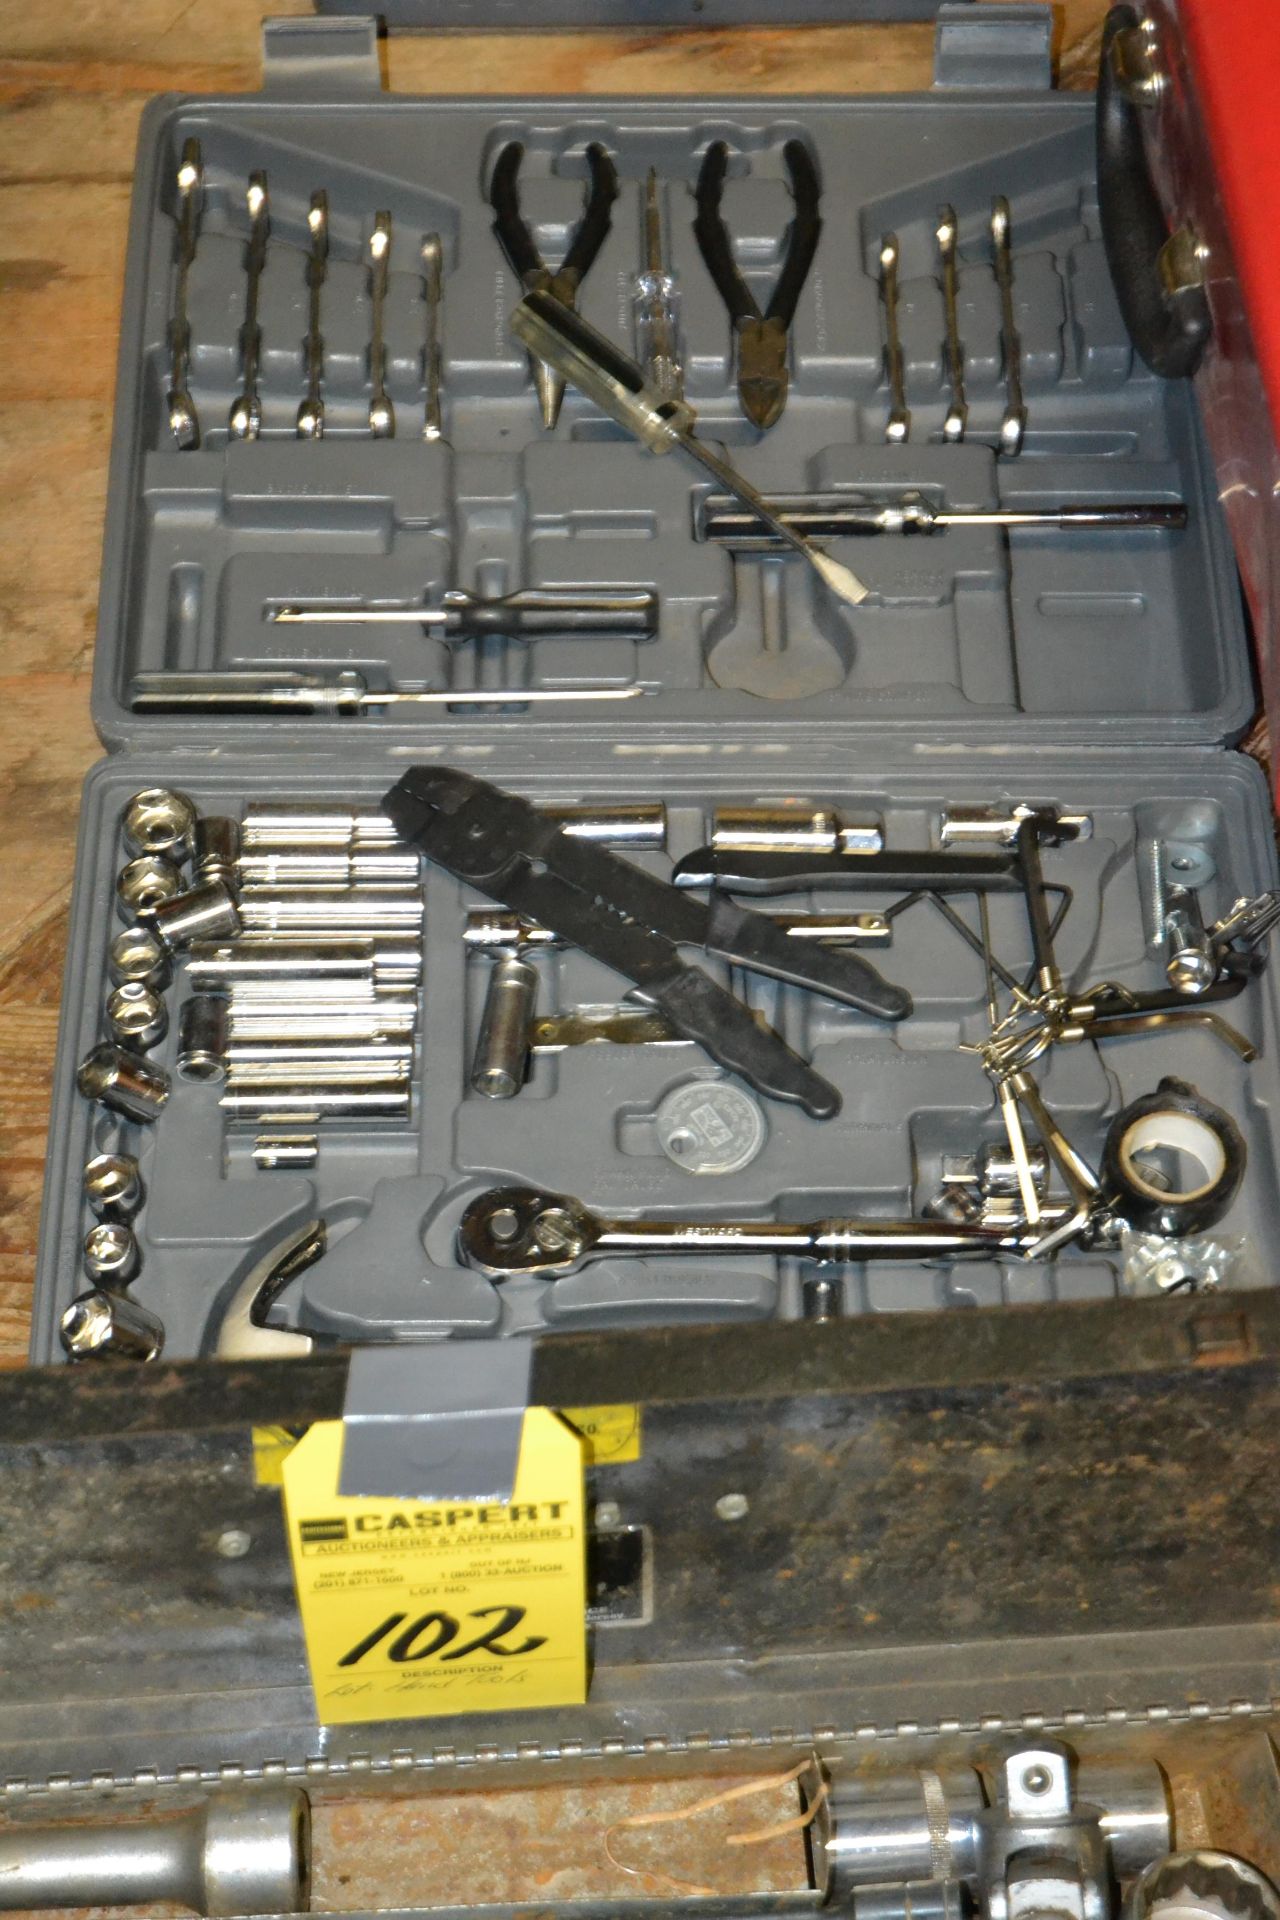 LOT - Socket Wrenches / Hand Tools